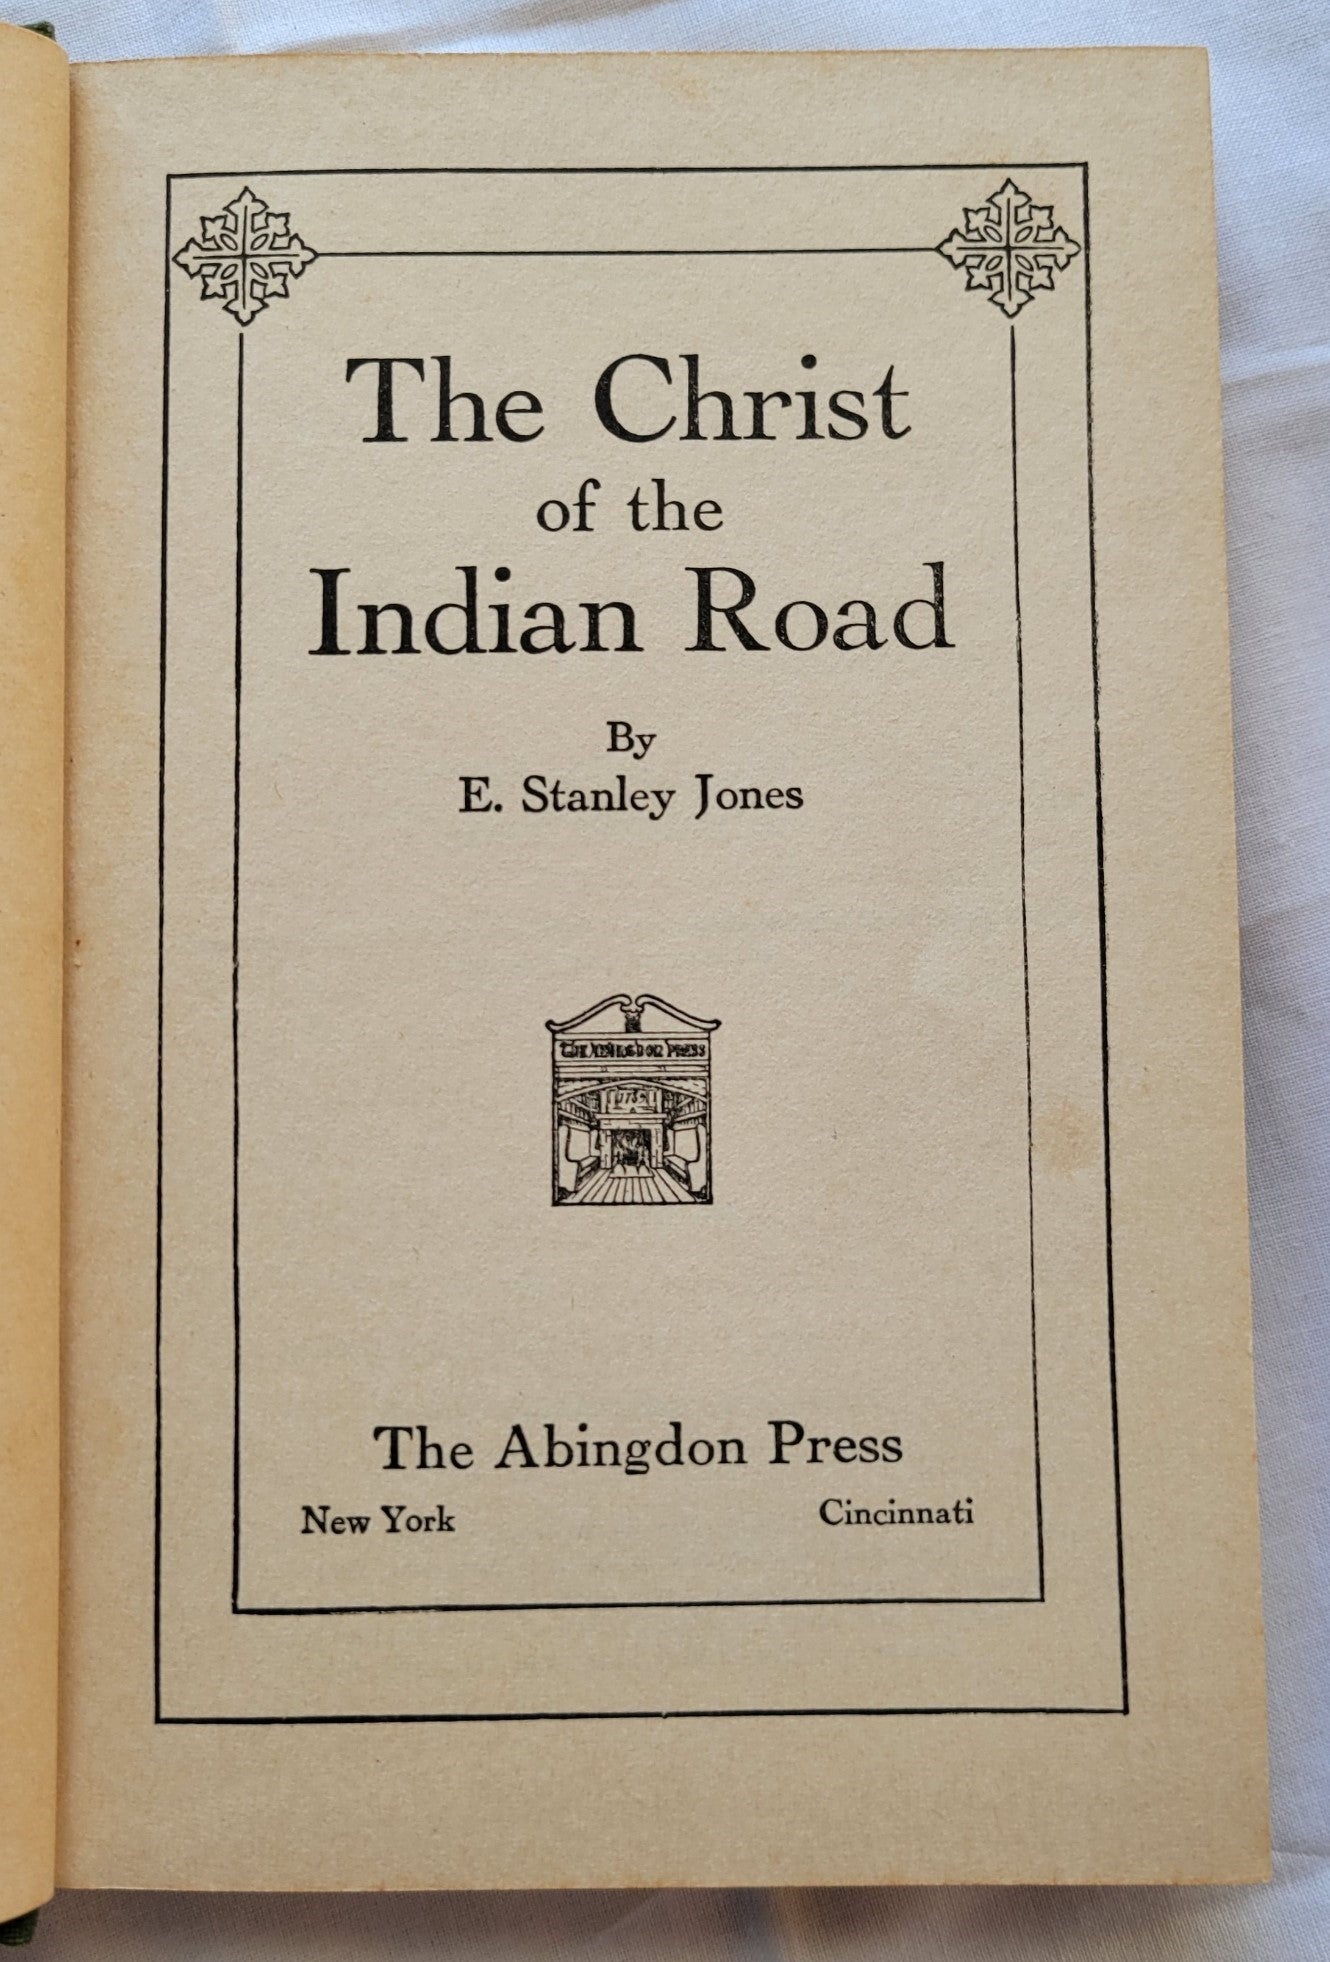  Antique book for sale "The Christ on Indian Road" by E. Stanley Jones, published by Abingdon Press, 1926. Title page.